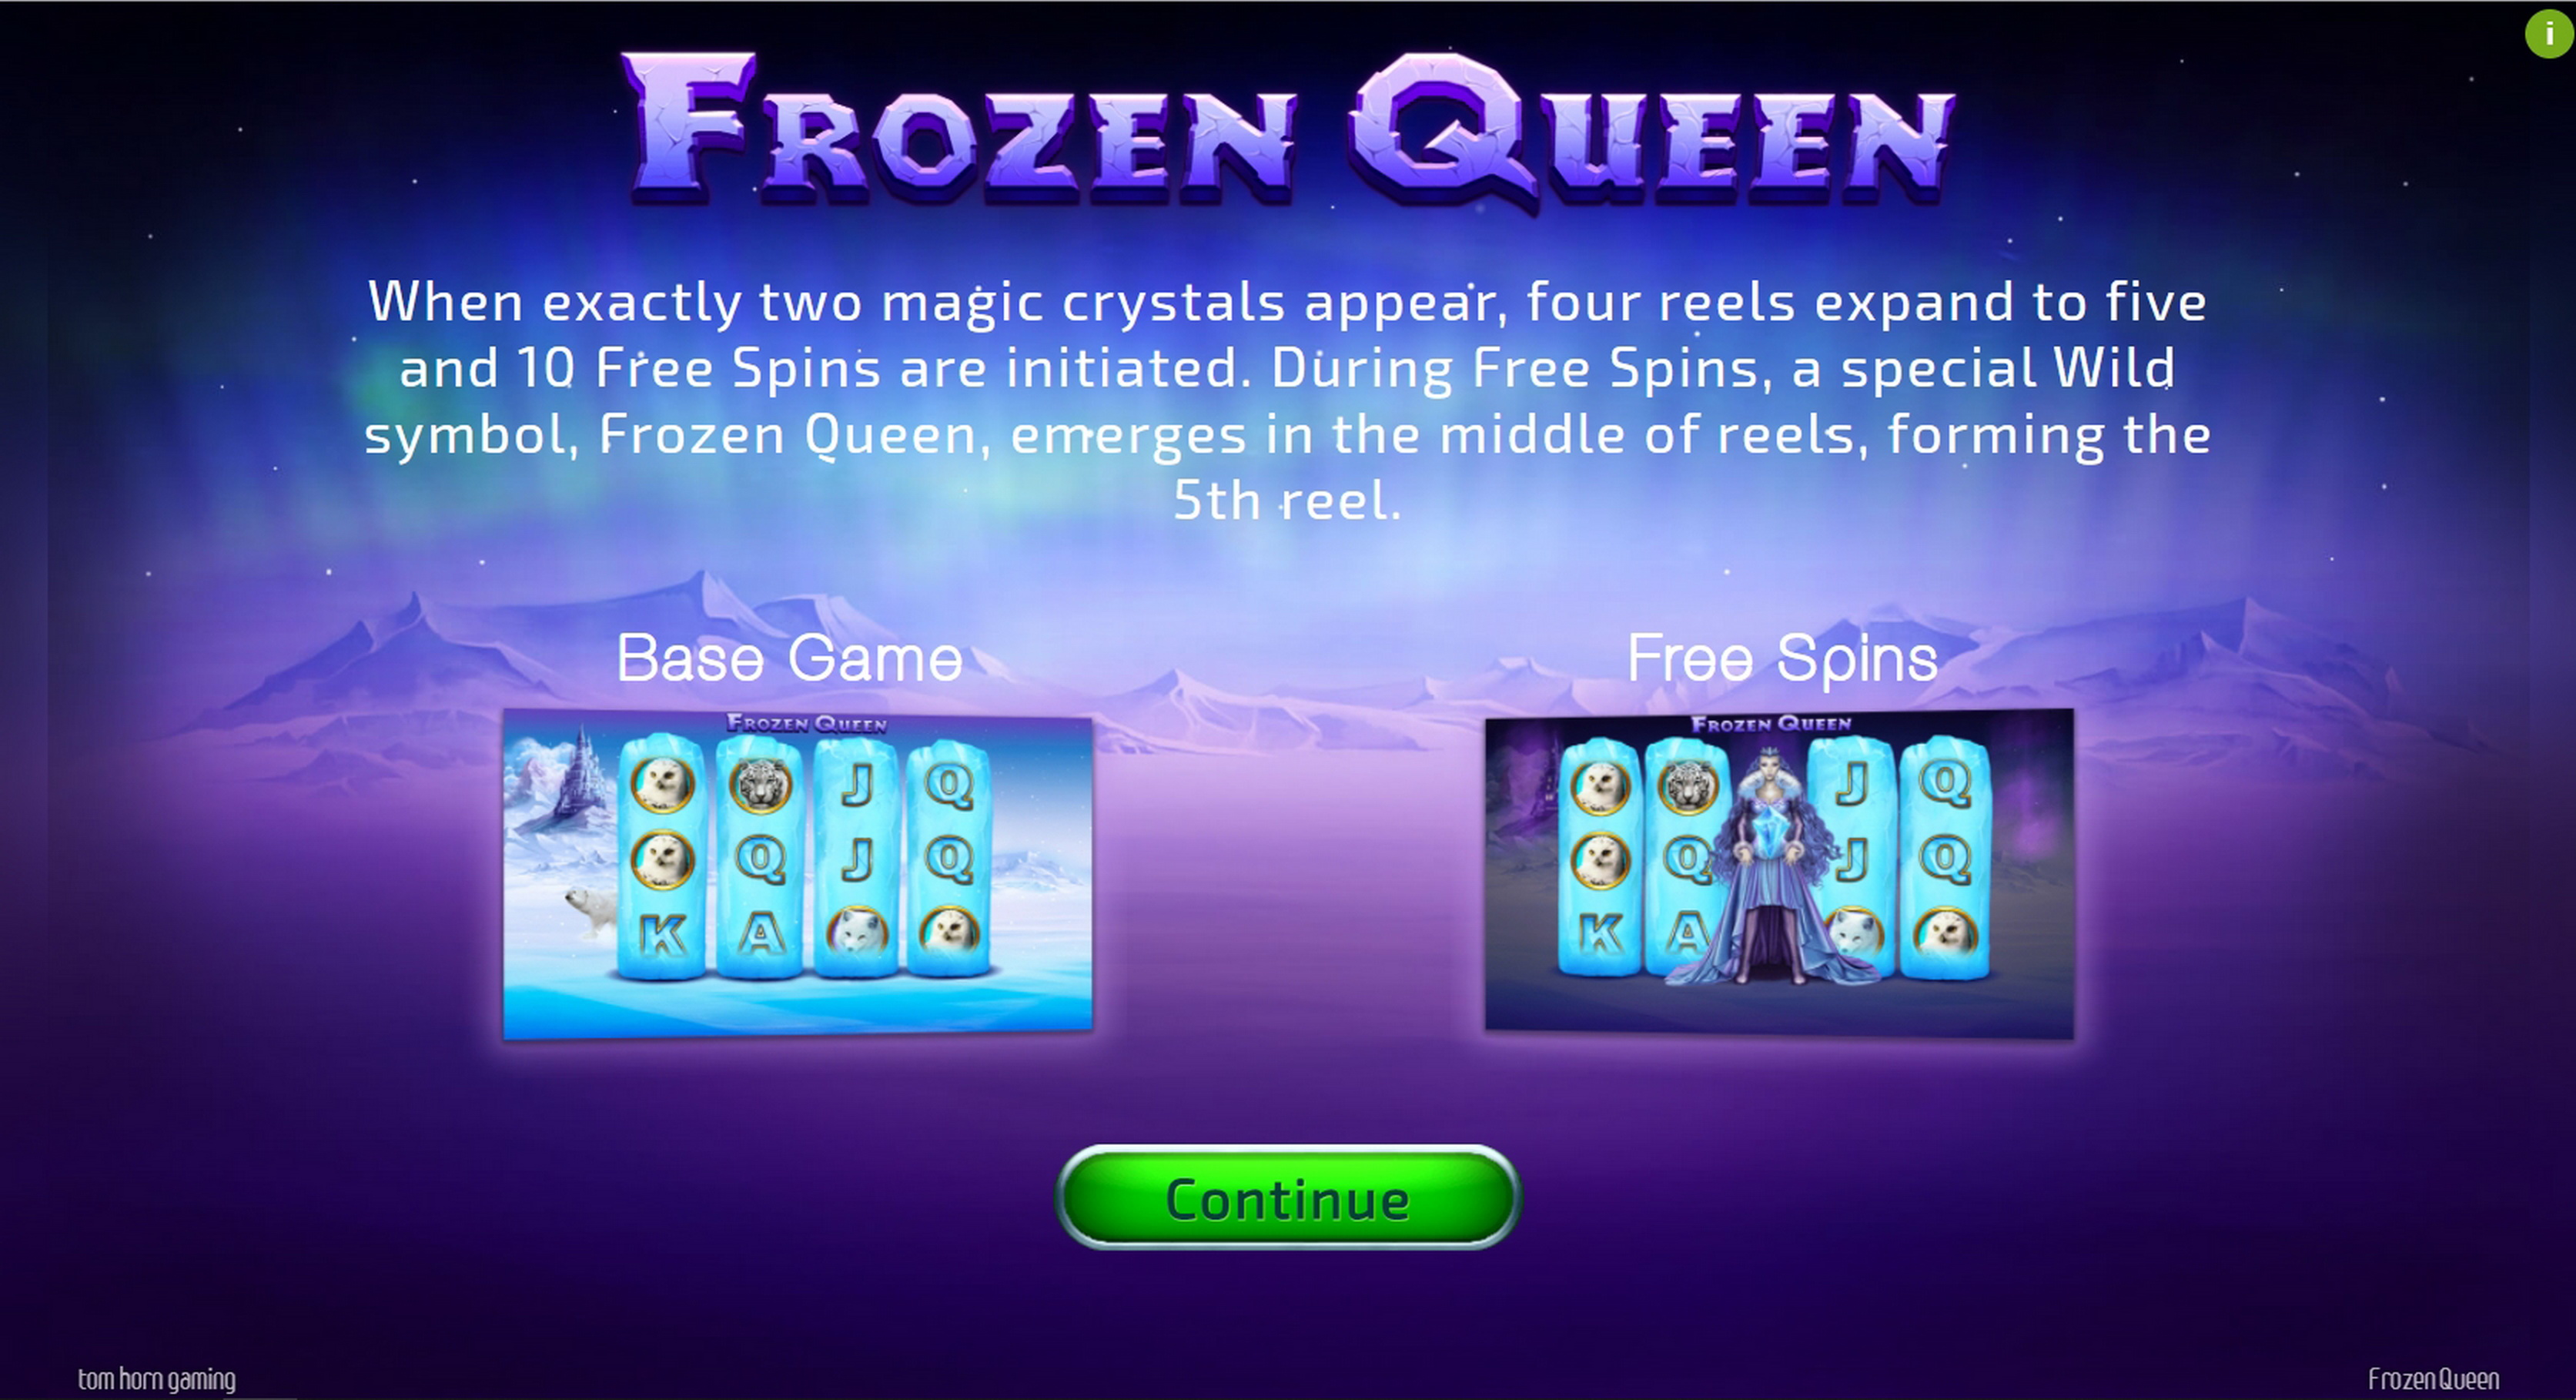 Play Frozen Queen Free Casino Slot Game by Tom Horn Gaming